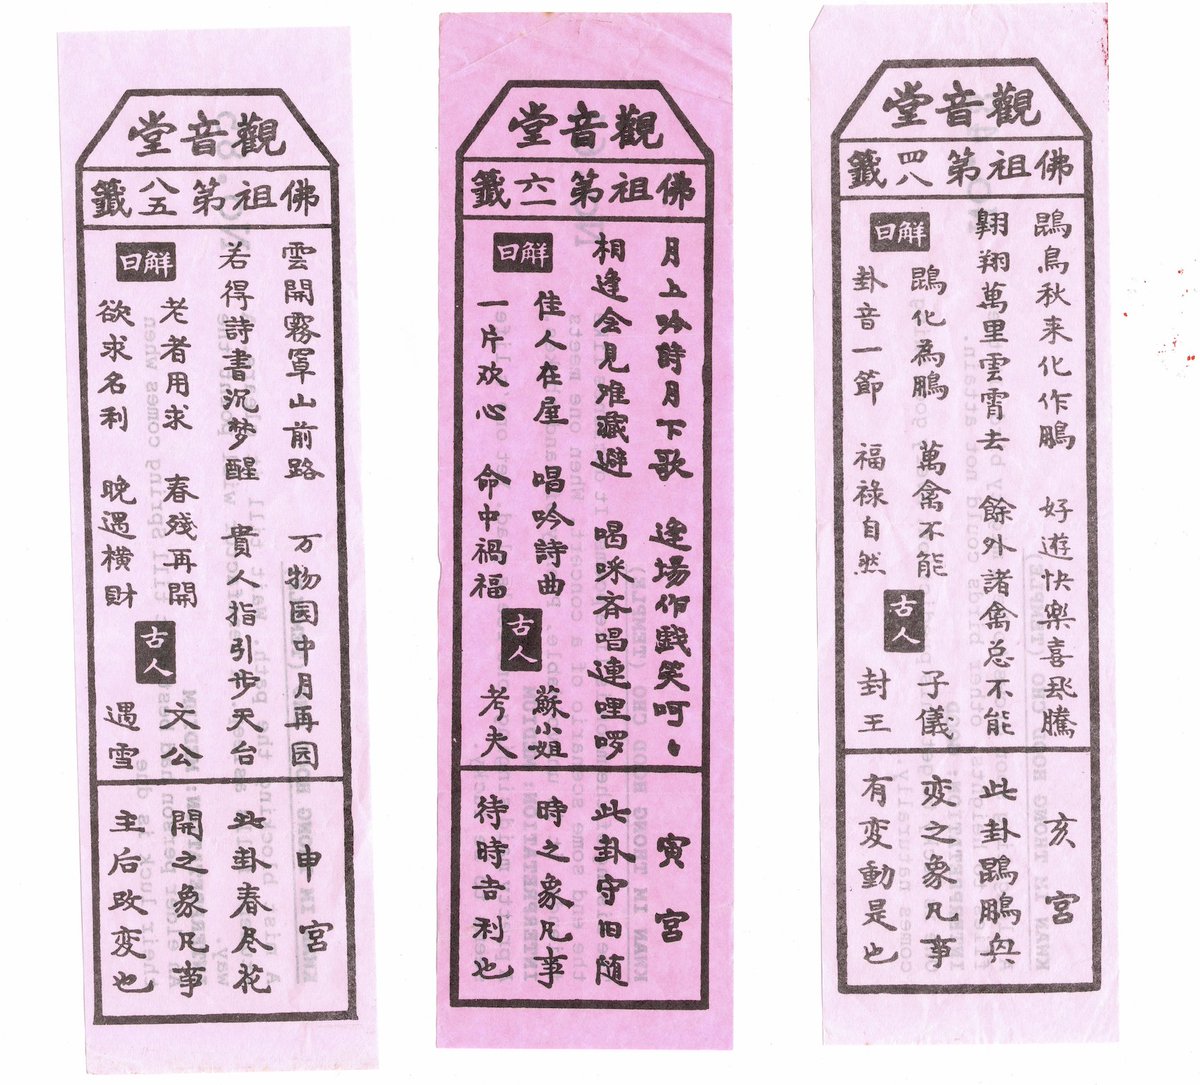 6. Here are some slips from the most famous Guanyin temple in Singapore. Its official name is "Kwan Im Thong Hood Cho Temple", but everyone there calls it the "Four-horse-road Guanyin temple" 四馬路觀音廟. the slips are bilingual; chinese on 1 side & english on the other